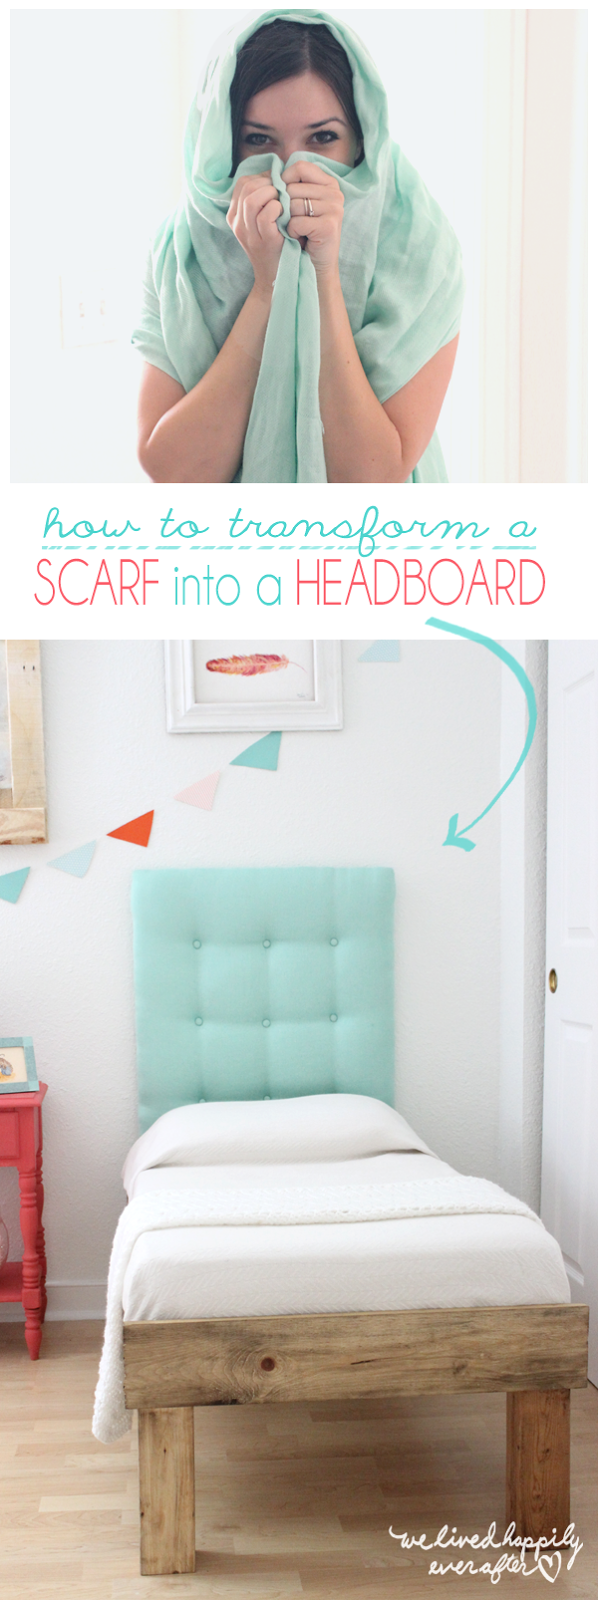 How to Transform a SCARF into a HEADBOARD